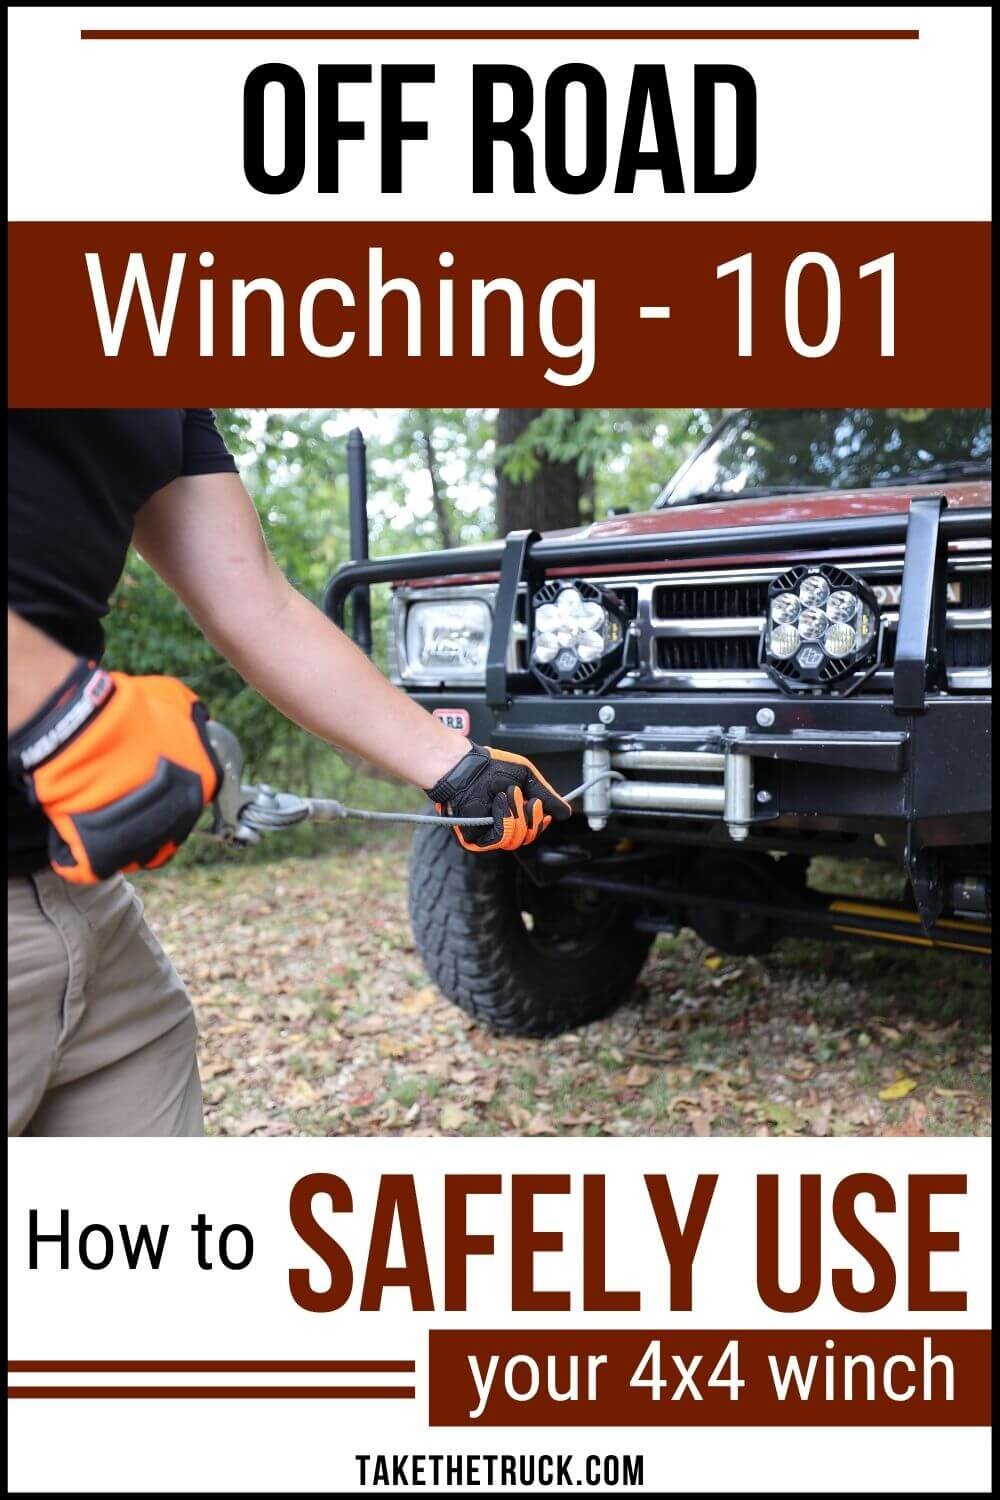 Are you learning how to use a winch? This post can help you choose the best 4x4 winch for your needs, and gives great winching techniques and off road winching recovery tips.